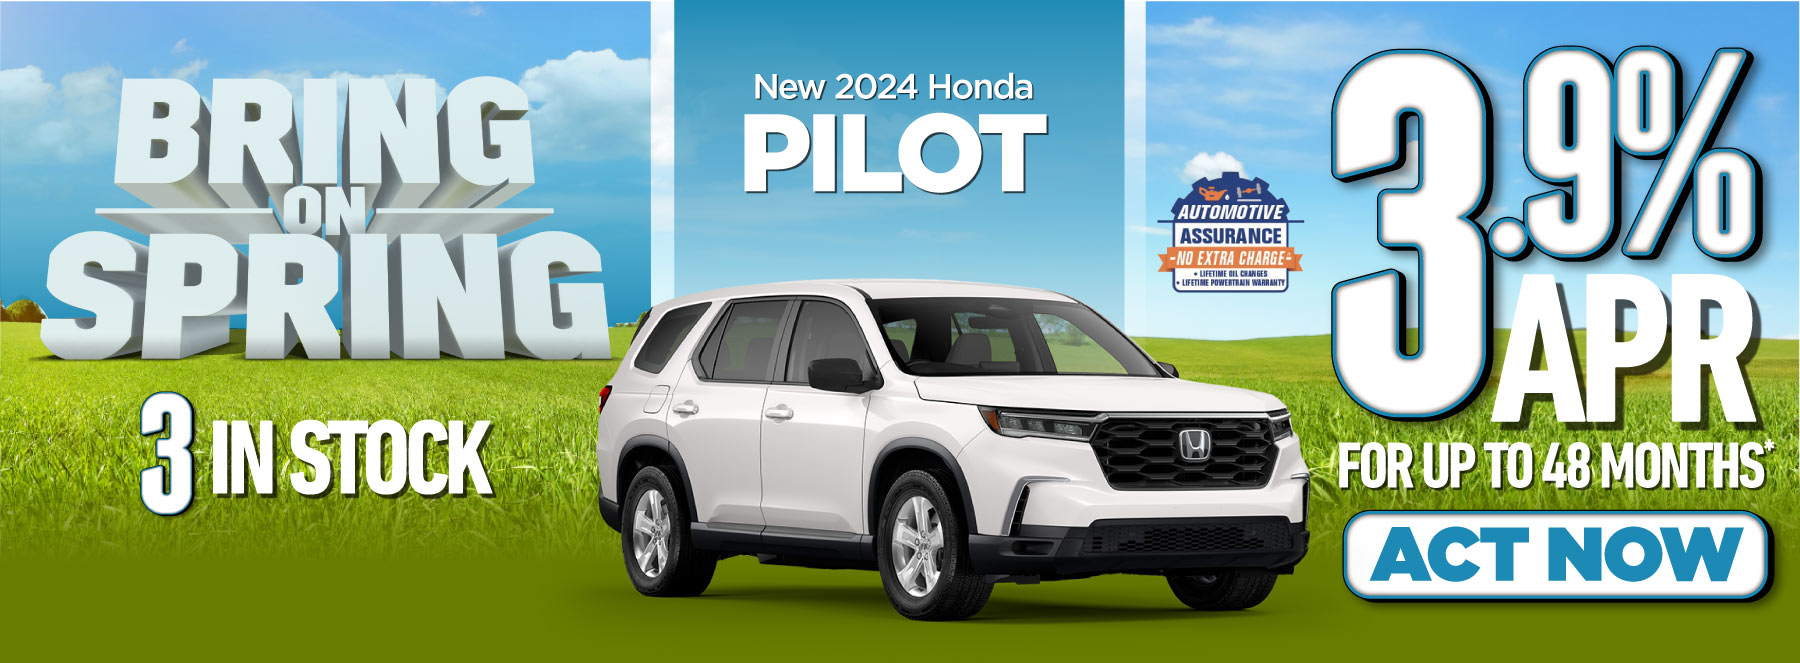 New 2024 Honda Pilot - Get 3.9% APR for up to 48 months* | Act Now